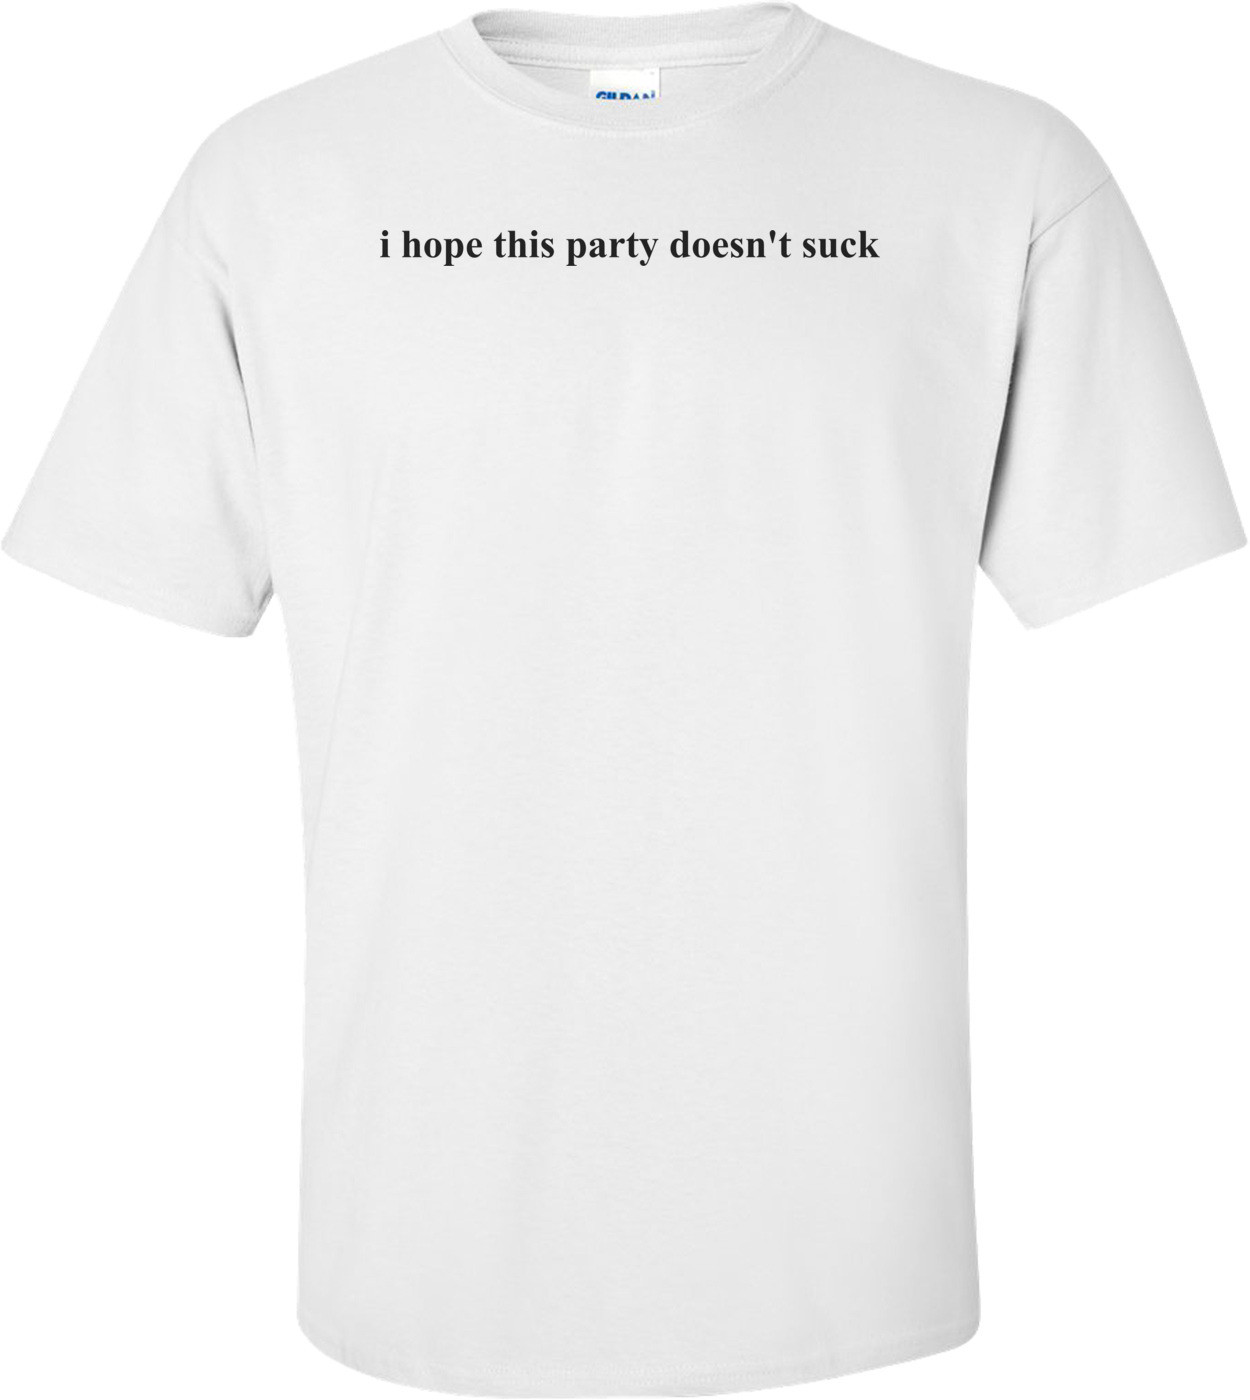 i hope this party doesn't suck Shirt